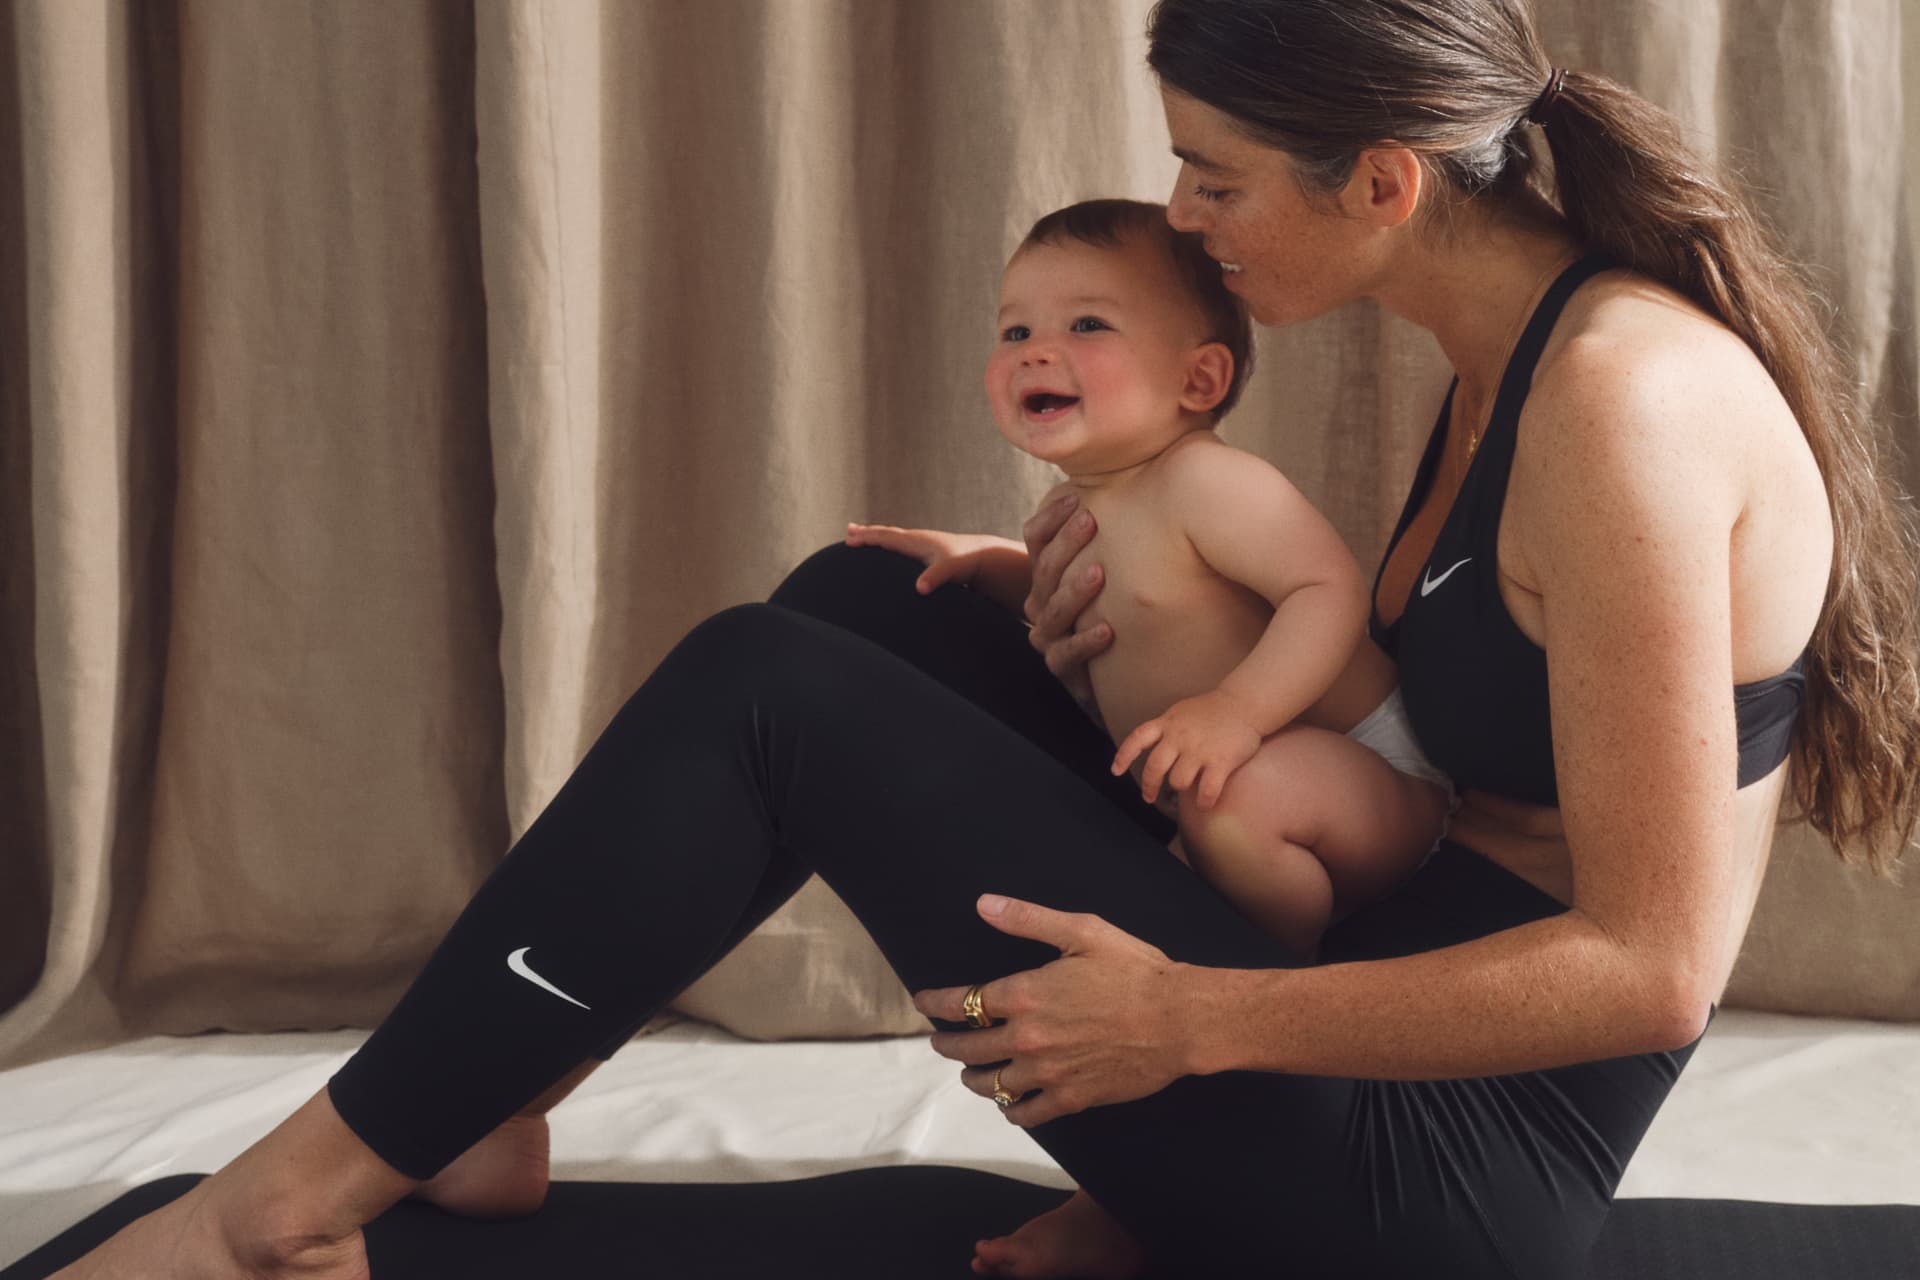 Nike Maternity One Tights